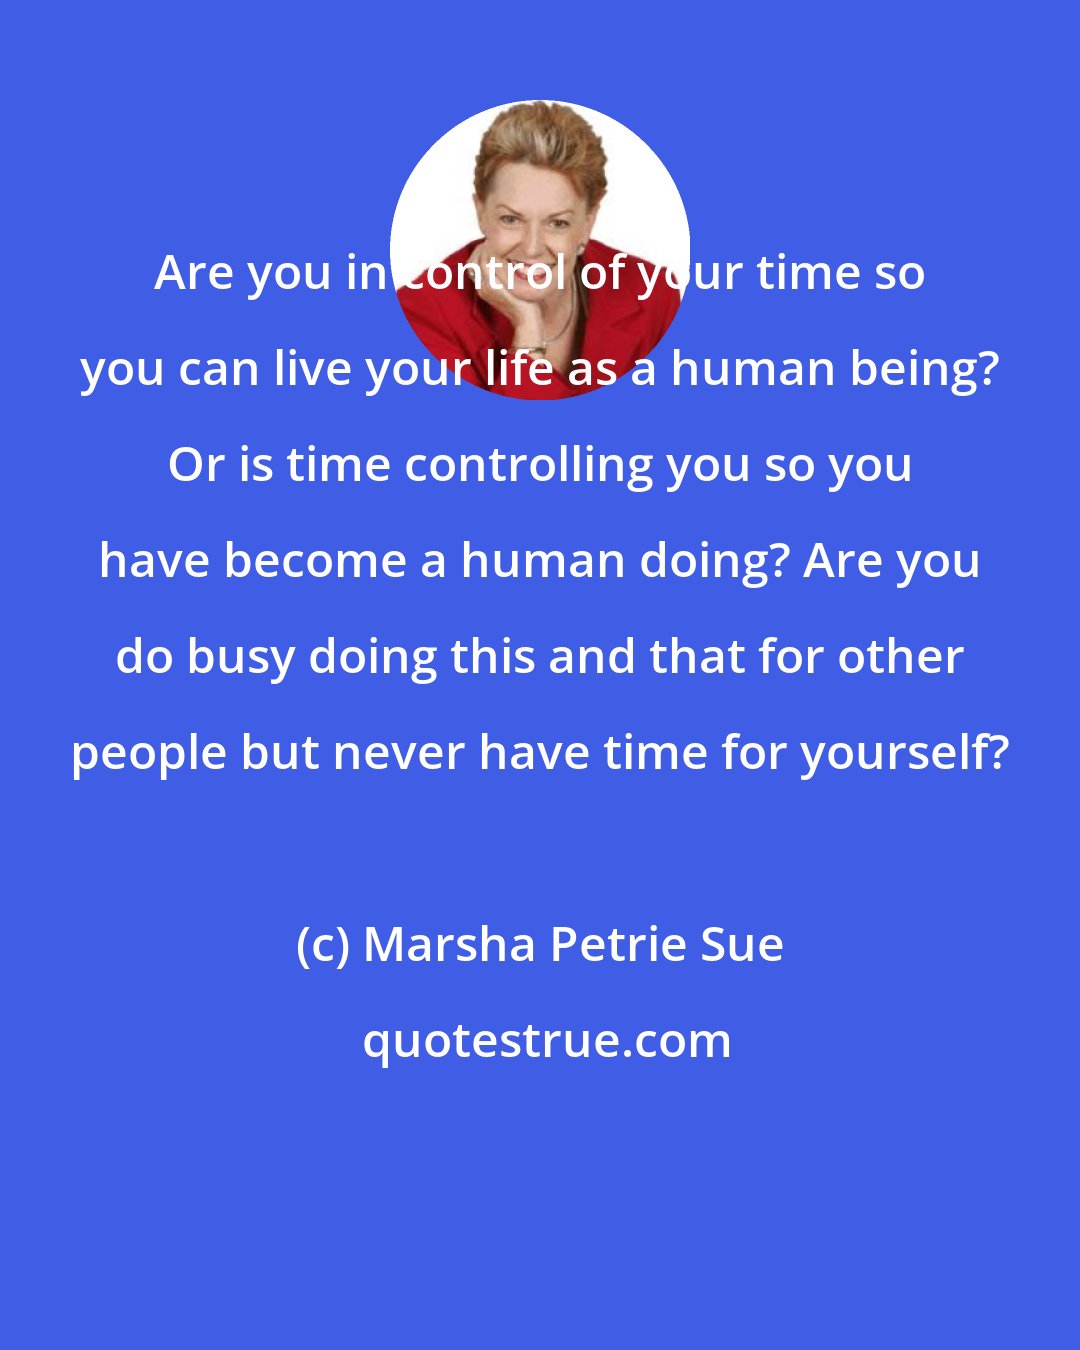 Marsha Petrie Sue: Are you in control of your time so you can live your life as a human being? Or is time controlling you so you have become a human doing? Are you do busy doing this and that for other people but never have time for yourself?